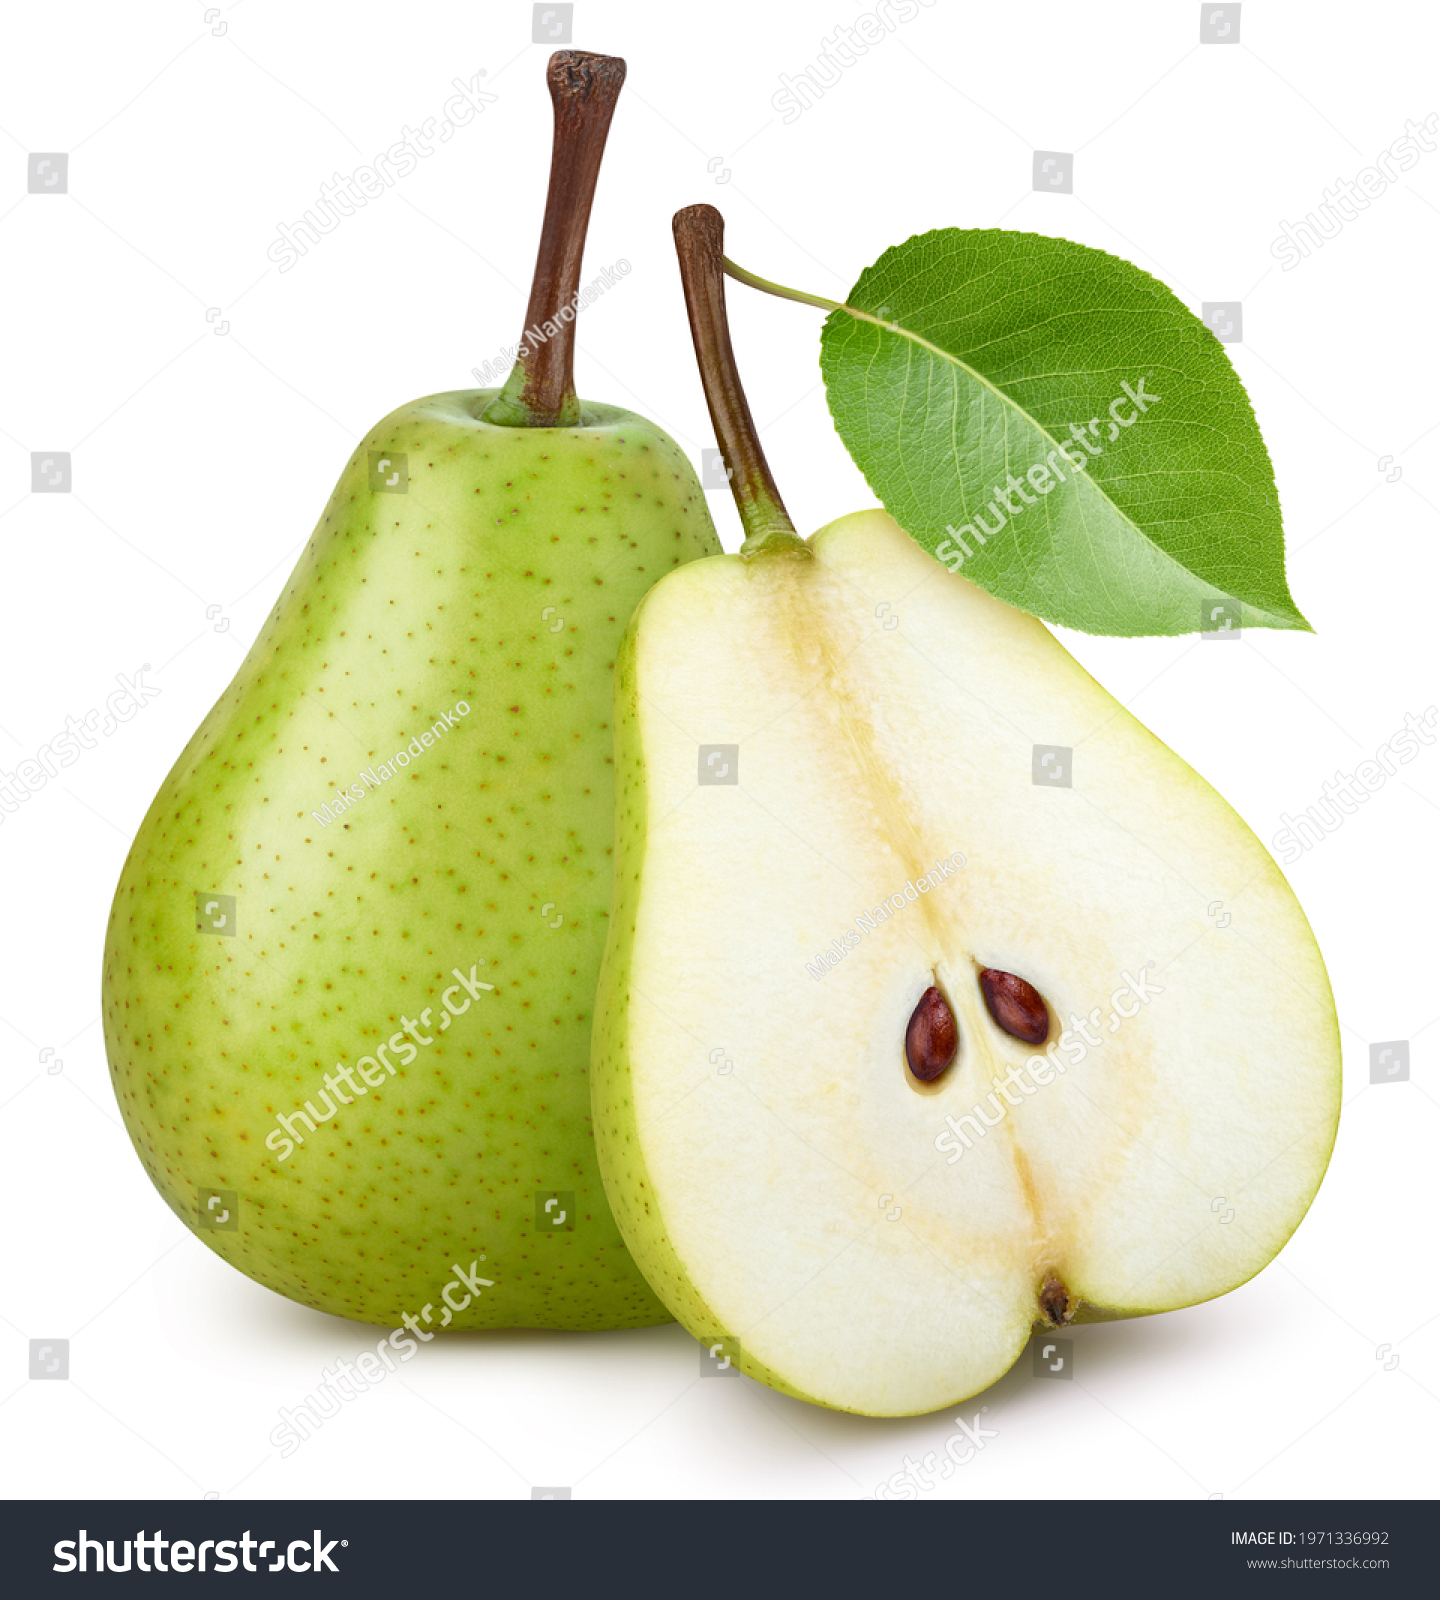 Pear fruit with pear leaf isolated on white background. Pear clipping path. Professional studio macro shooting #1971336992